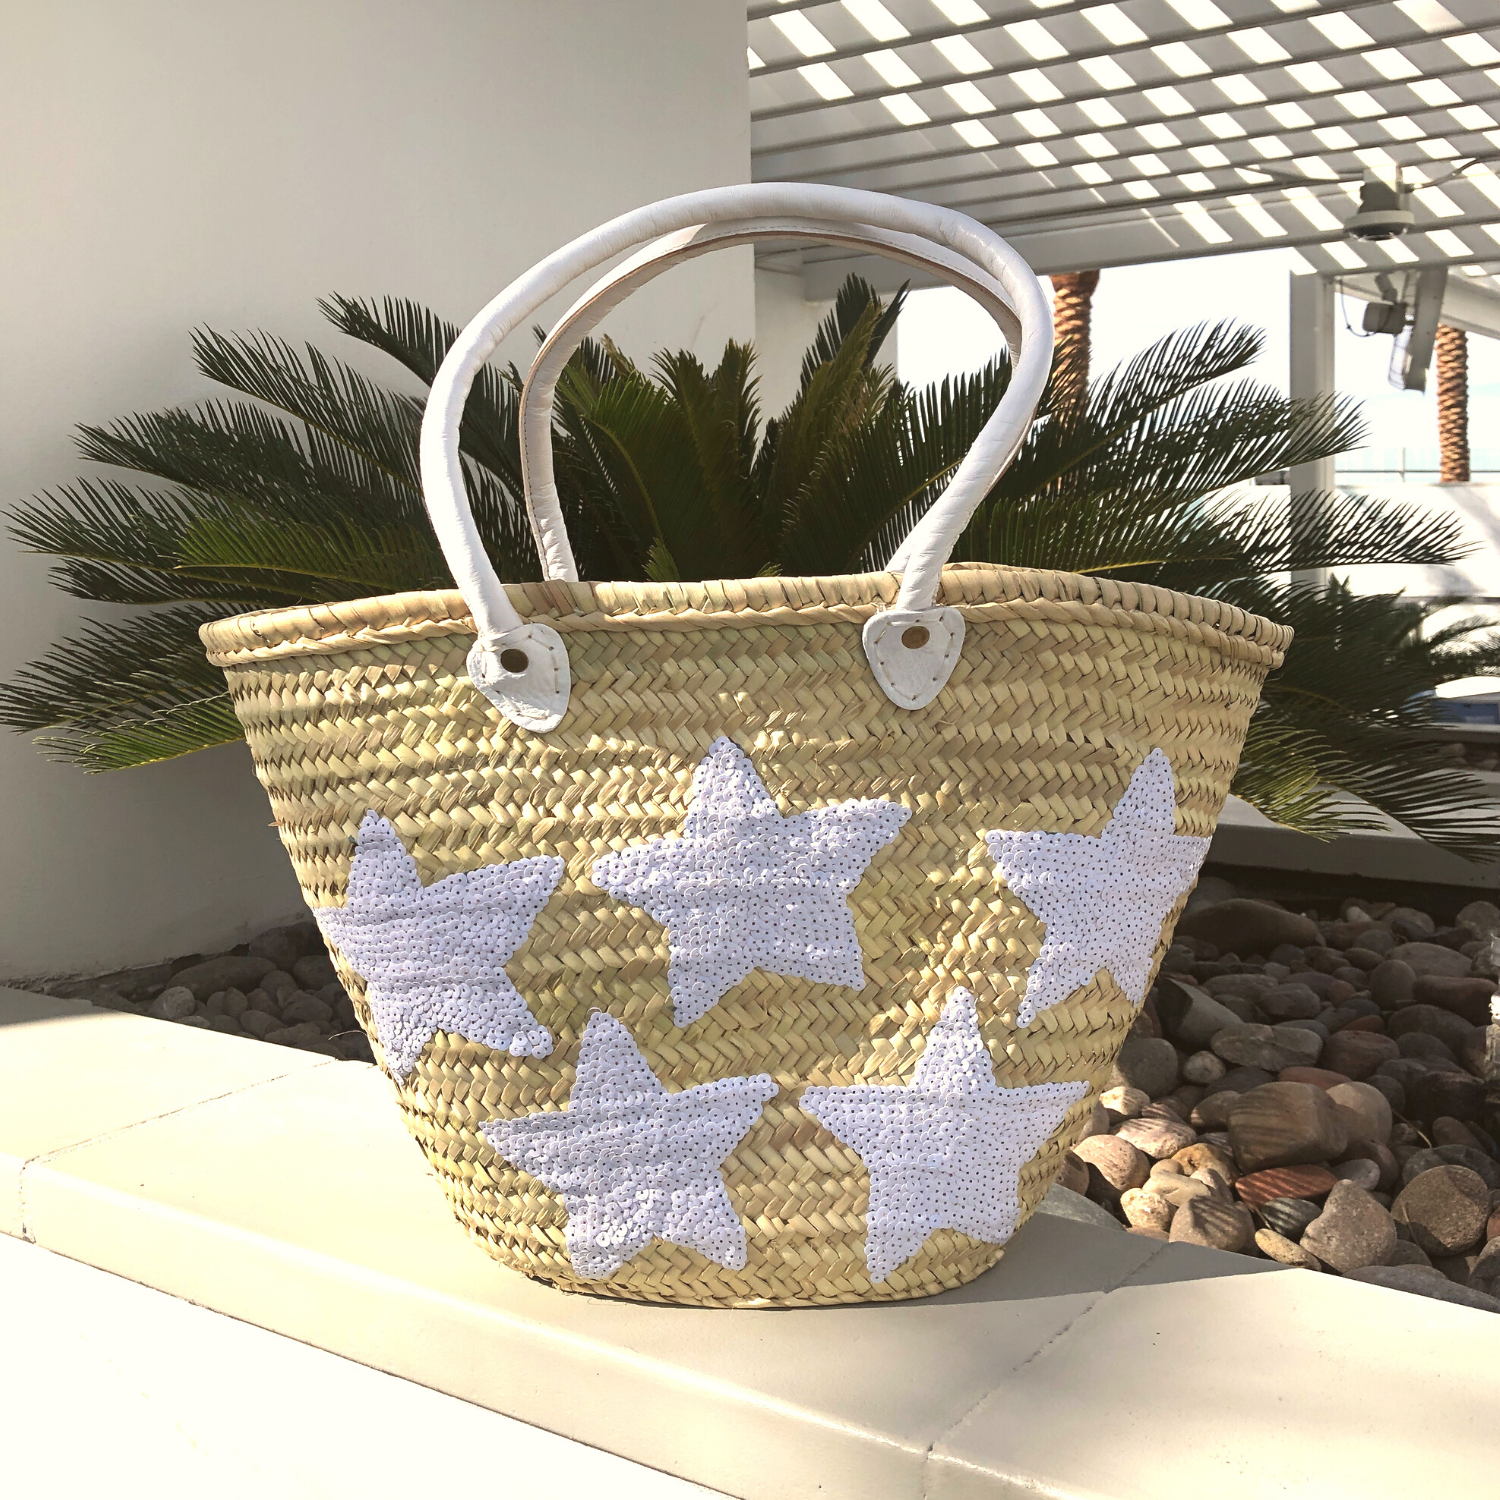 Large Straw Tote with White Sequin Stars